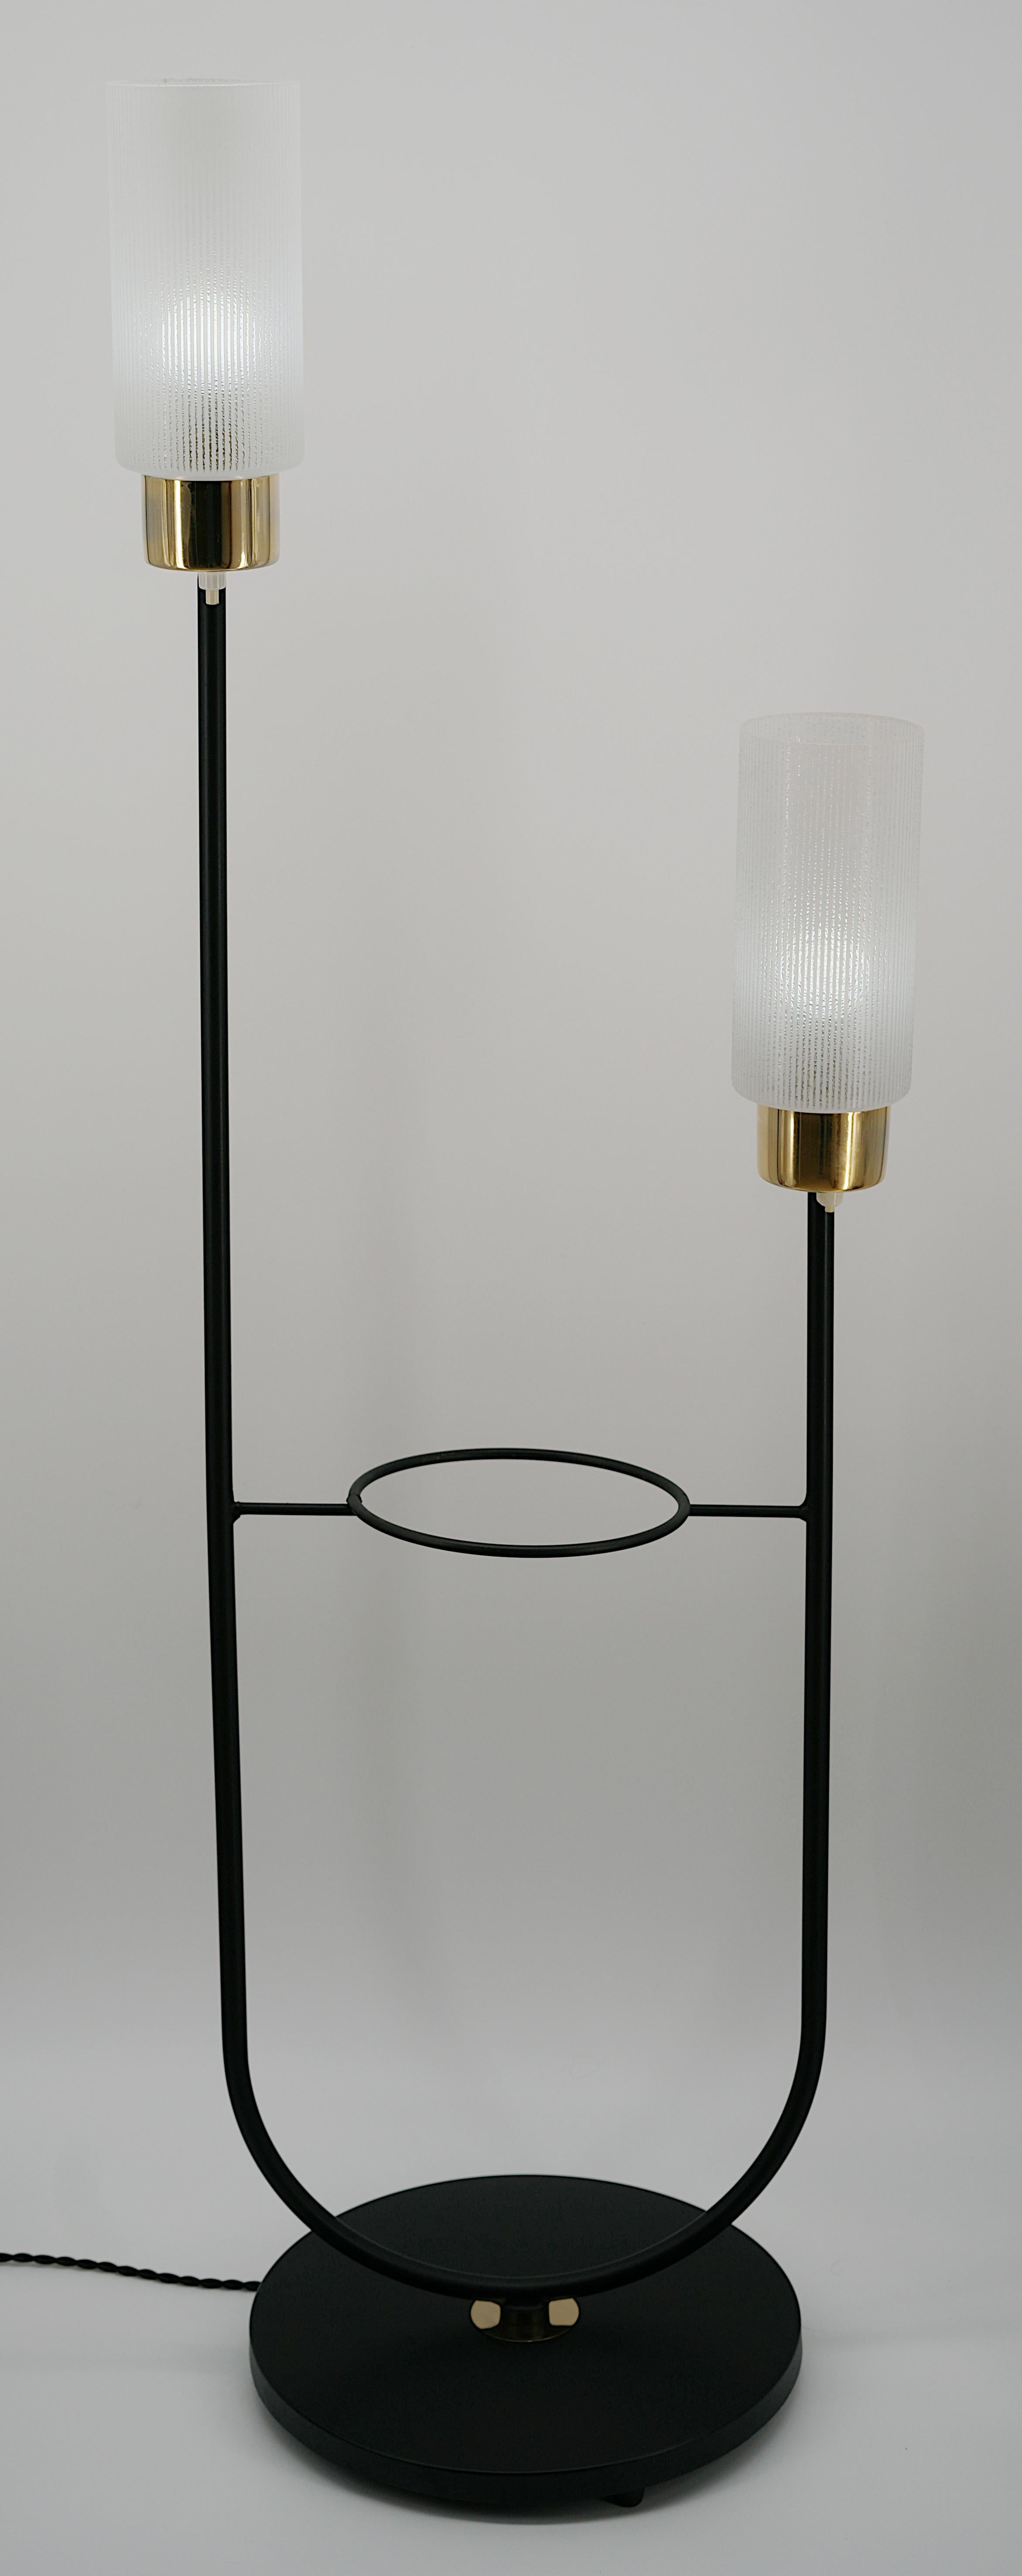 French midcentury floor lamp by Arlus (Paris), France, 1950s. Original shades on their metal and brass base. One push button per shade. Measures: Height: 45.3